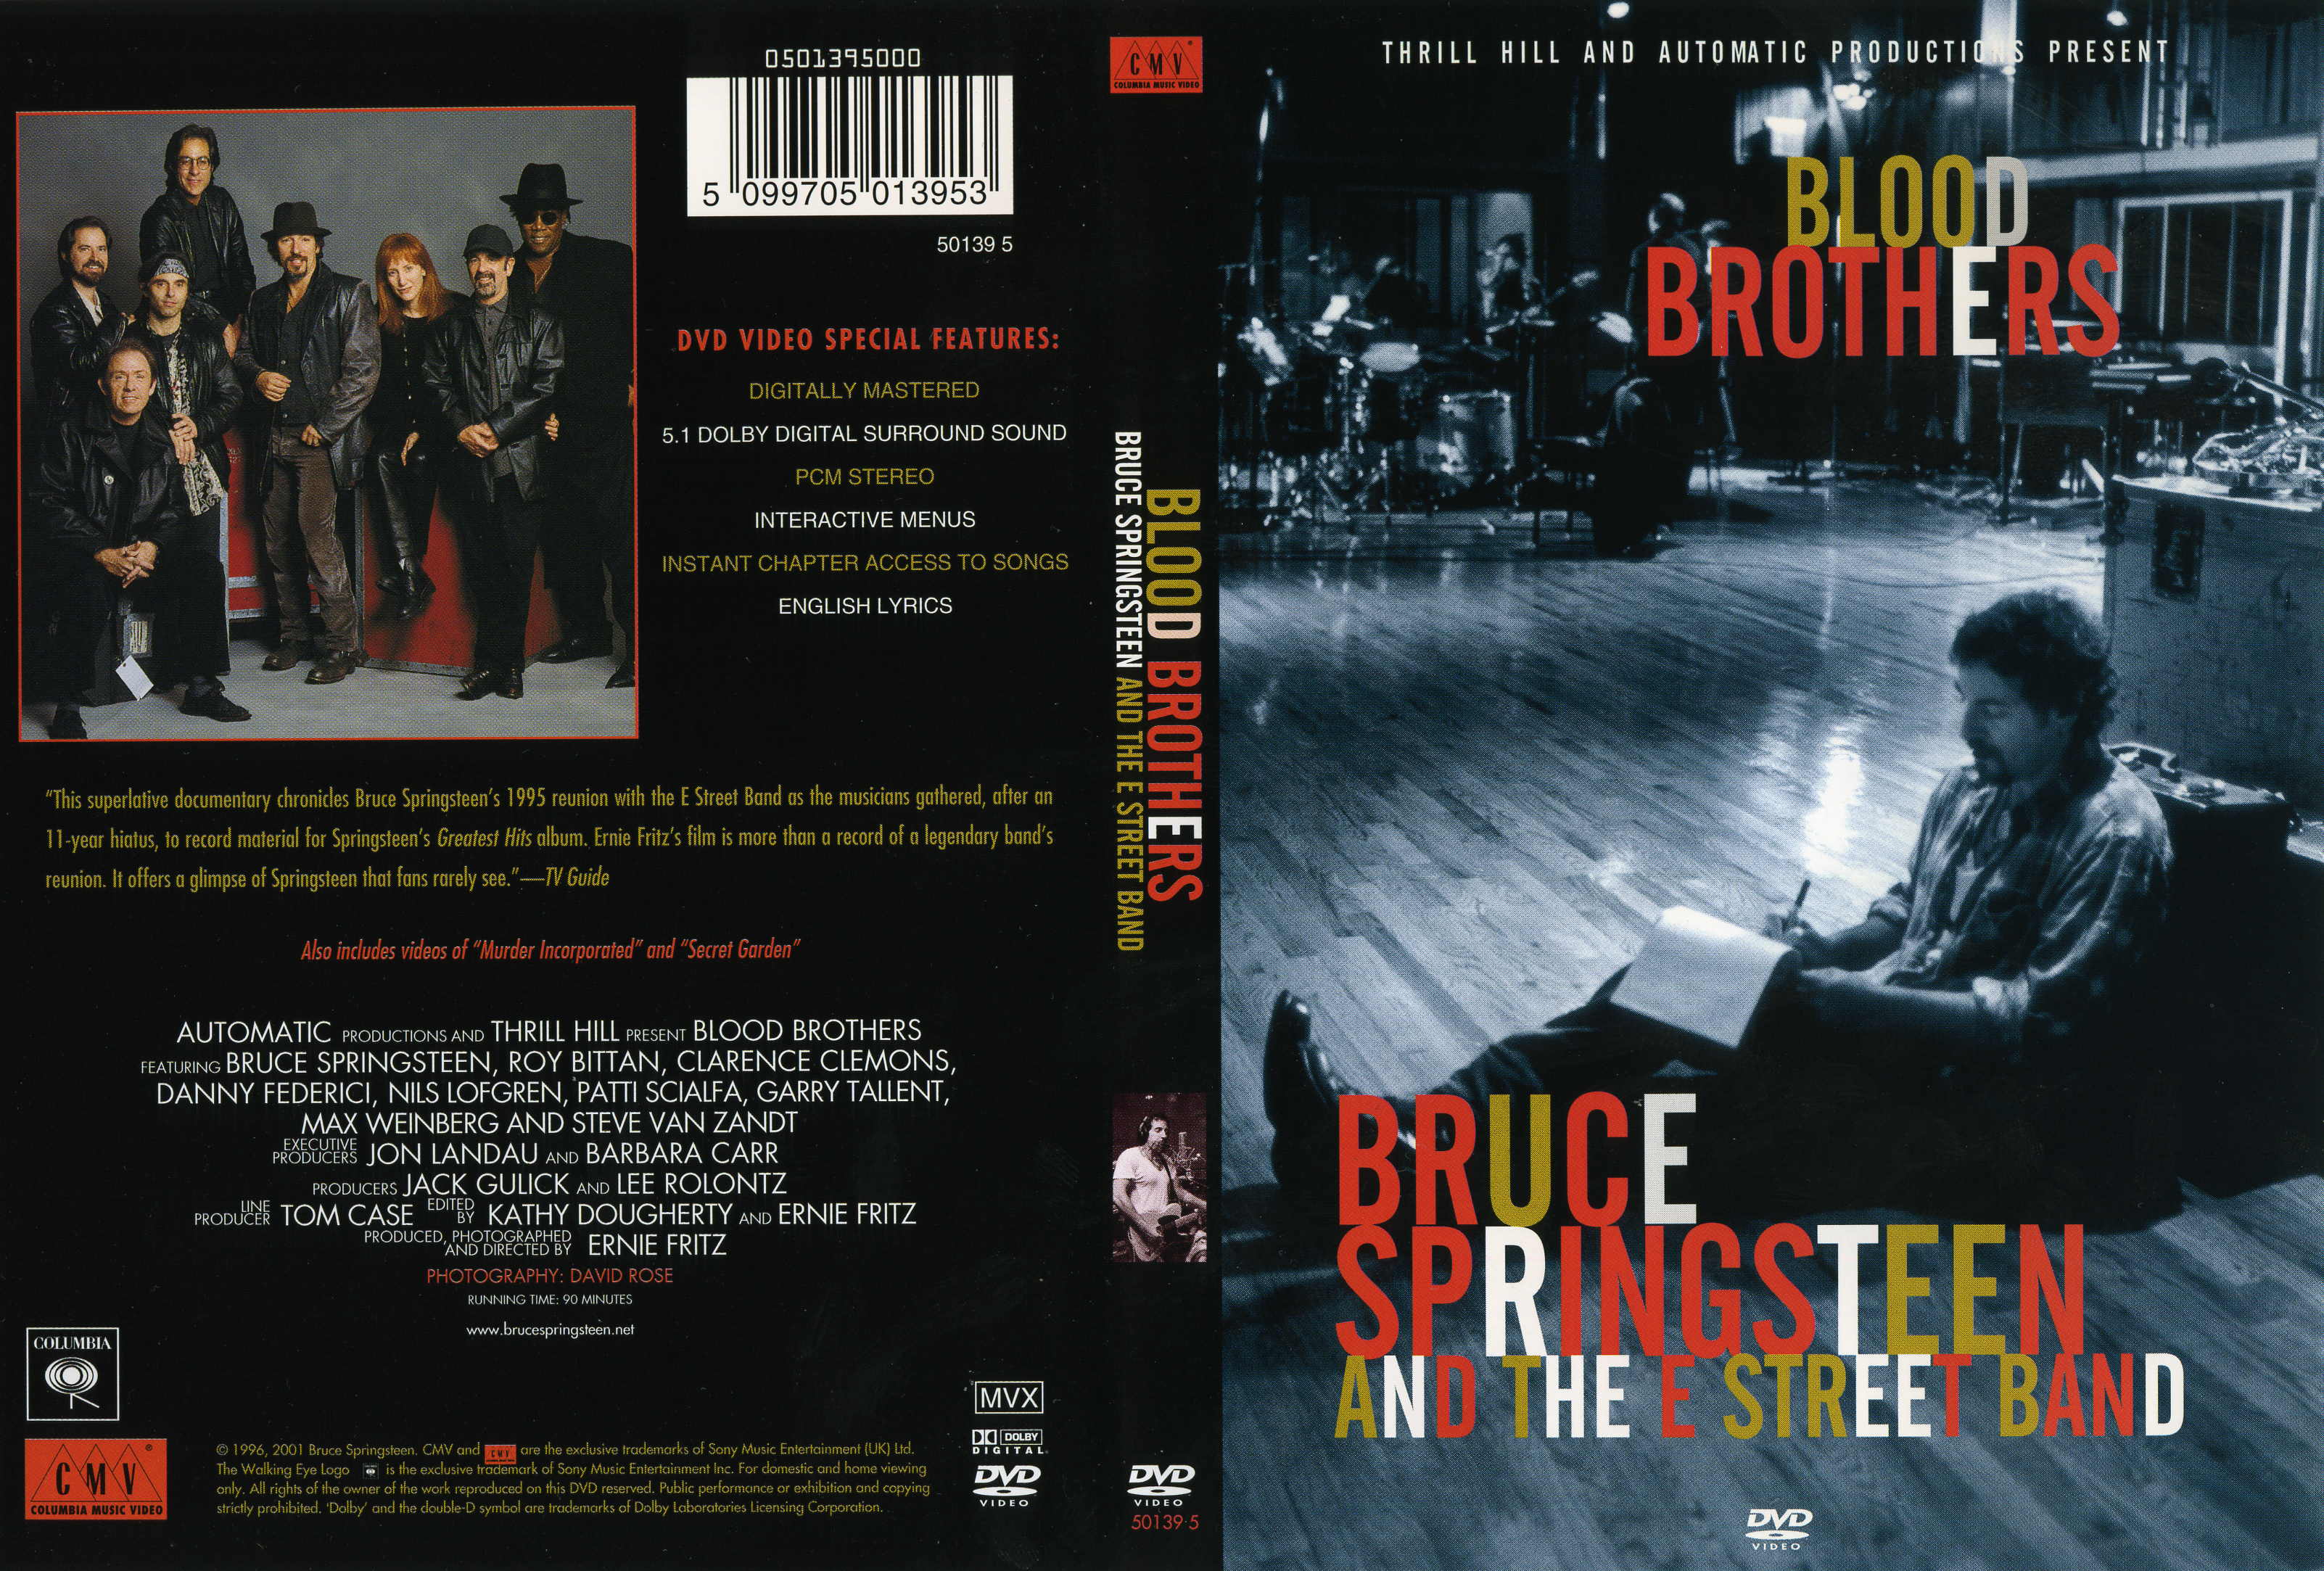 Jaquette DVD Bruce Springsteen and the Street Band